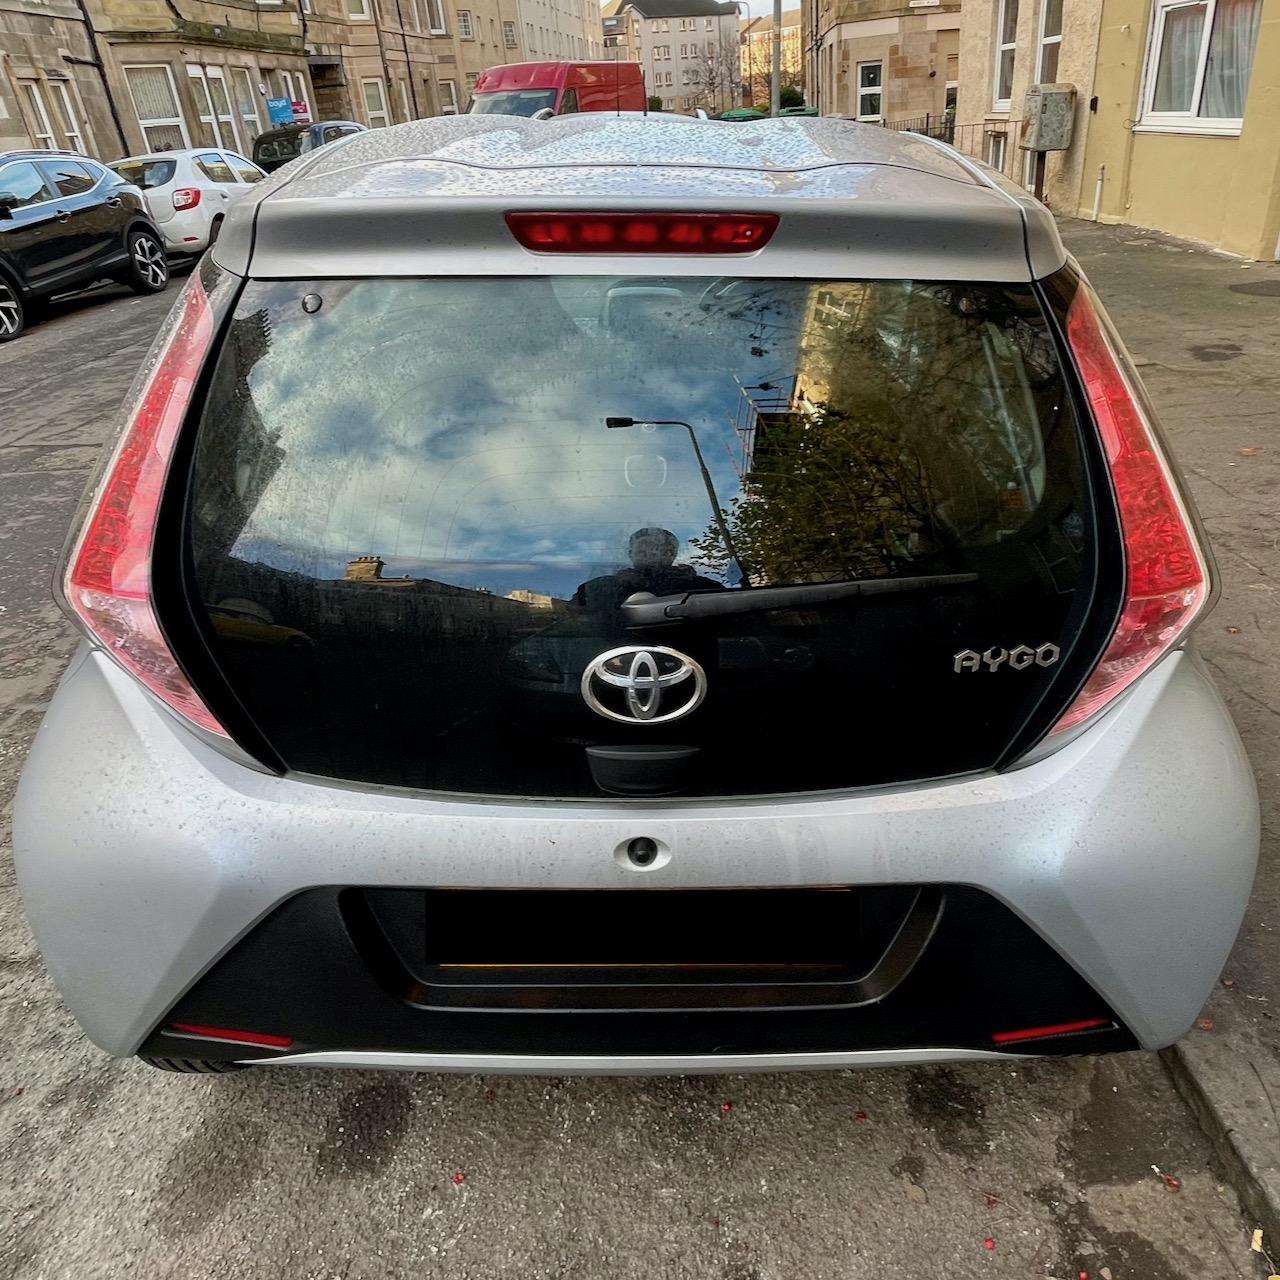 Upgrading rear tail lights to facelift ones? - Aygo & Club - Owners Club - Forum